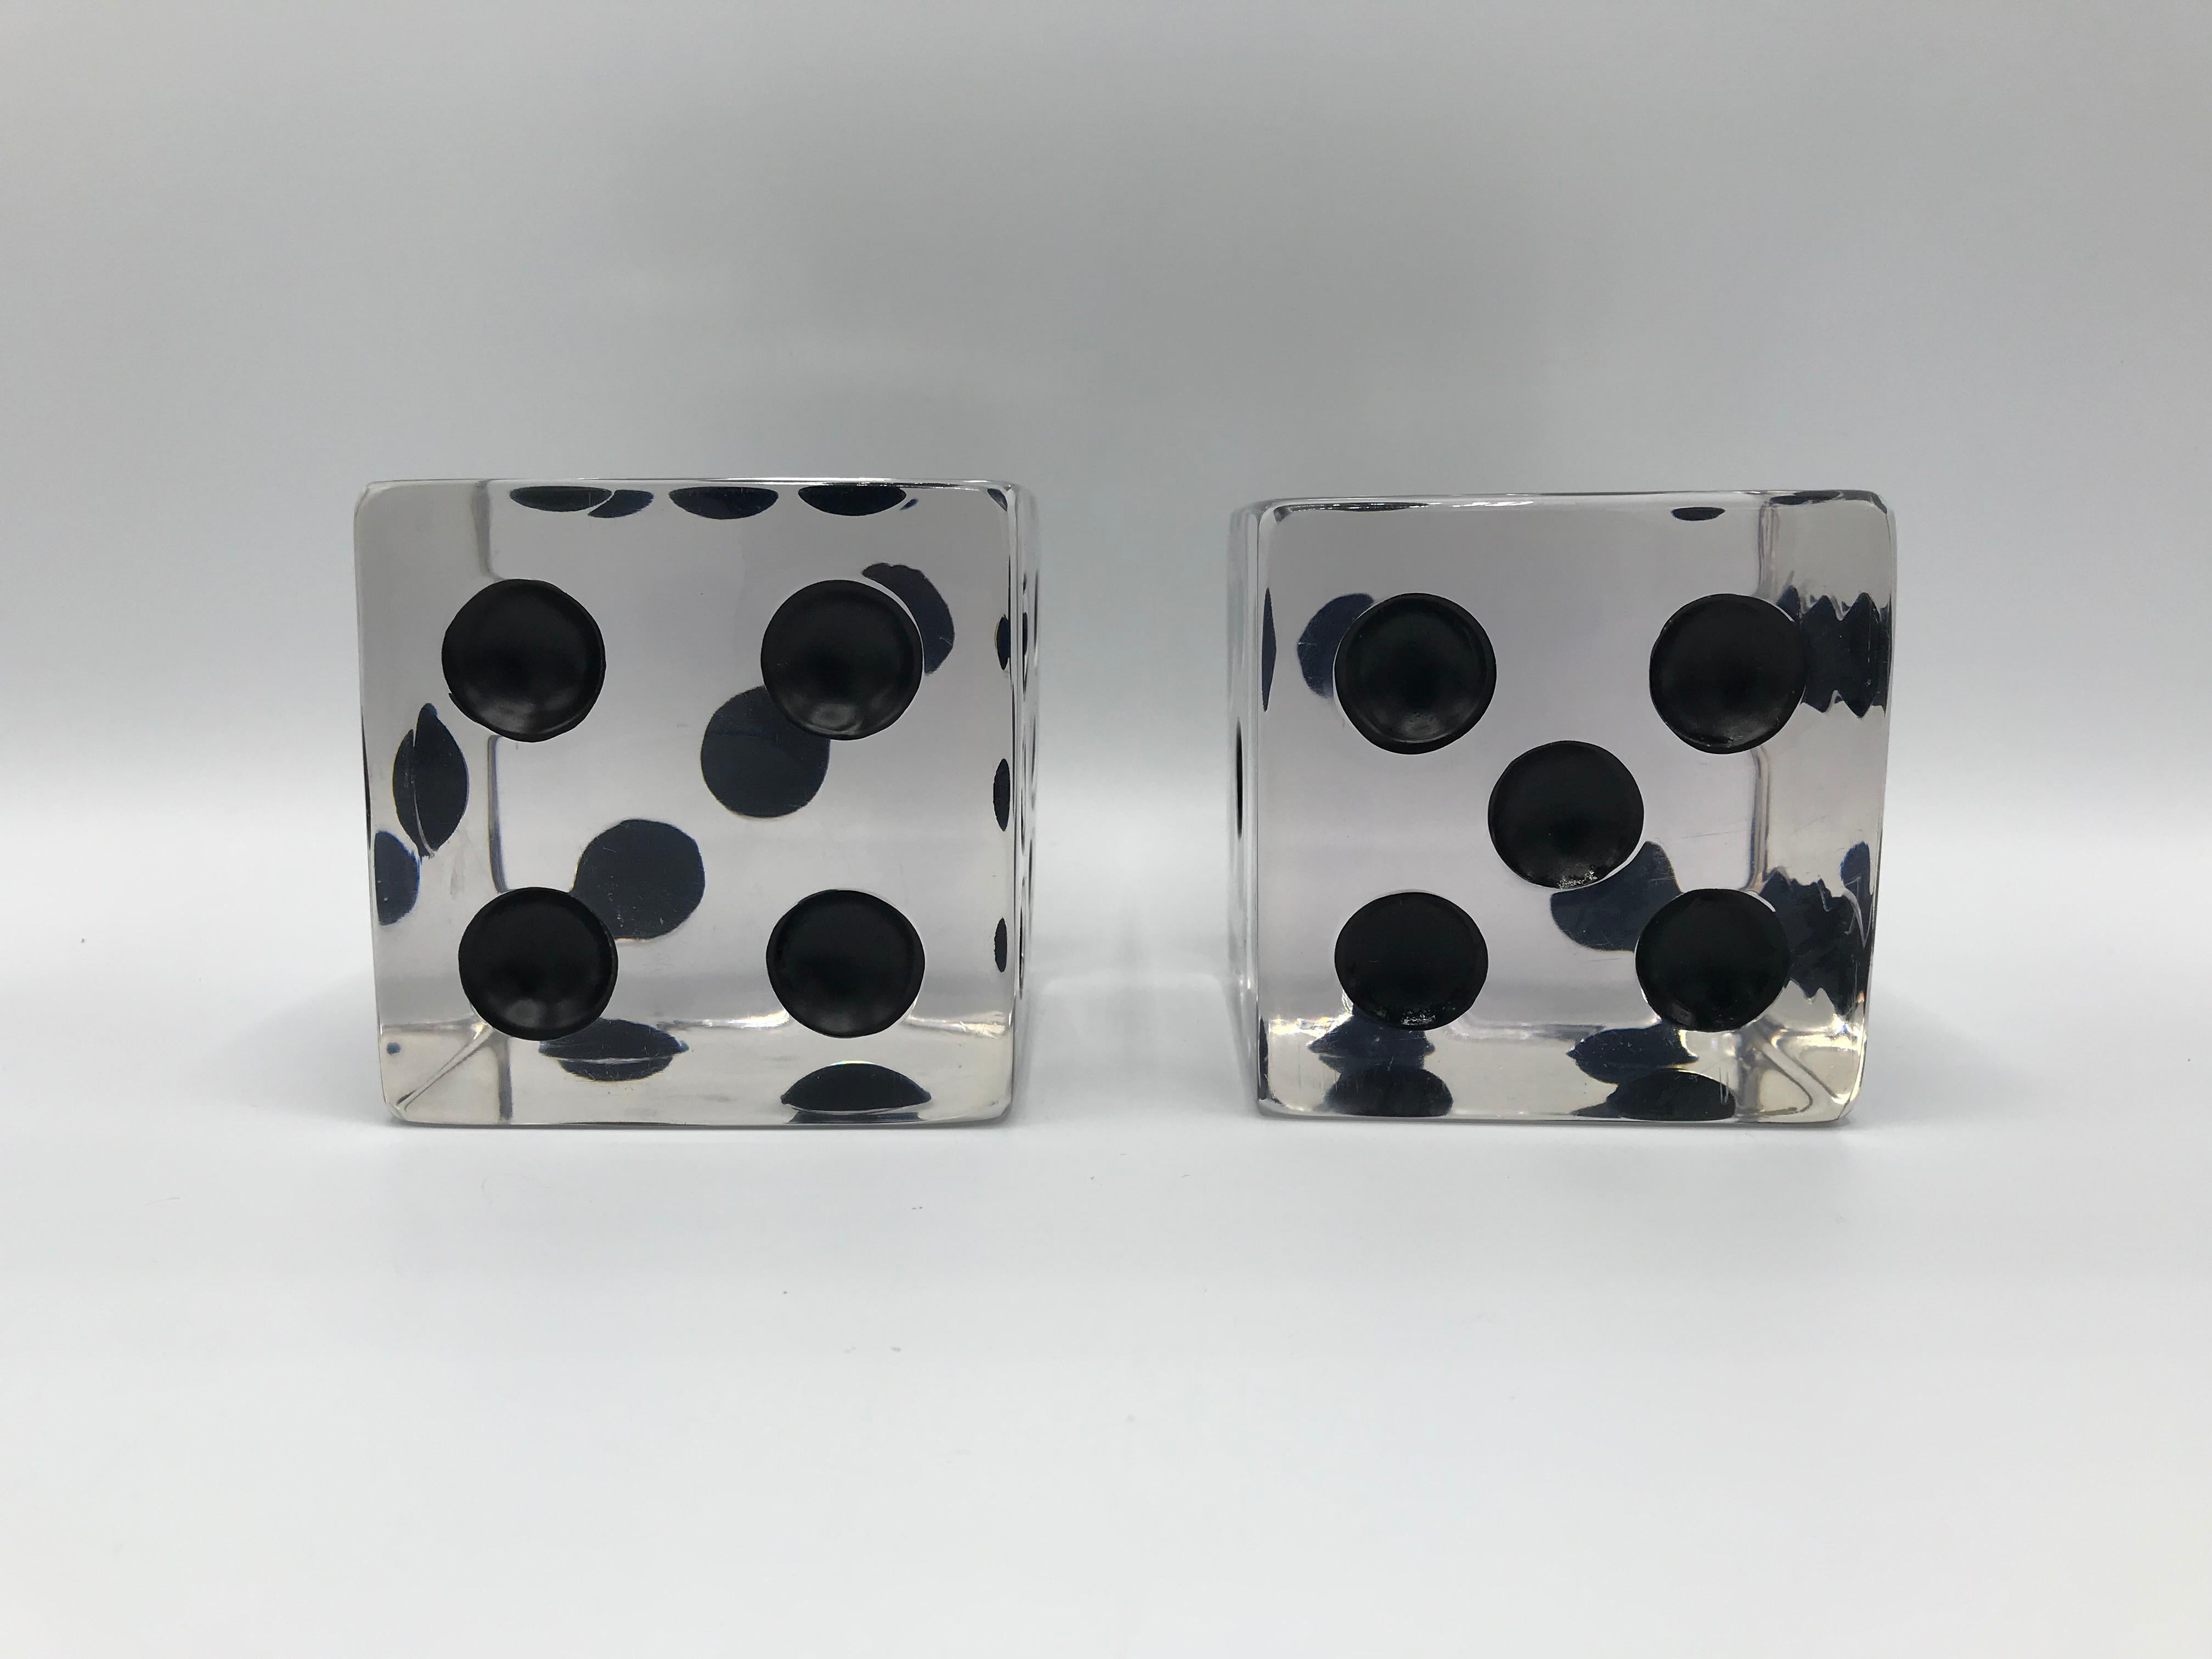 Listed is a fabulous and unique, pair of 1980s oversized Lucite game dice sculptures. The pair would be perfect on any tabletop or shelf. Large enough to be used as bookends. Heavy, weighing 2lbs each.